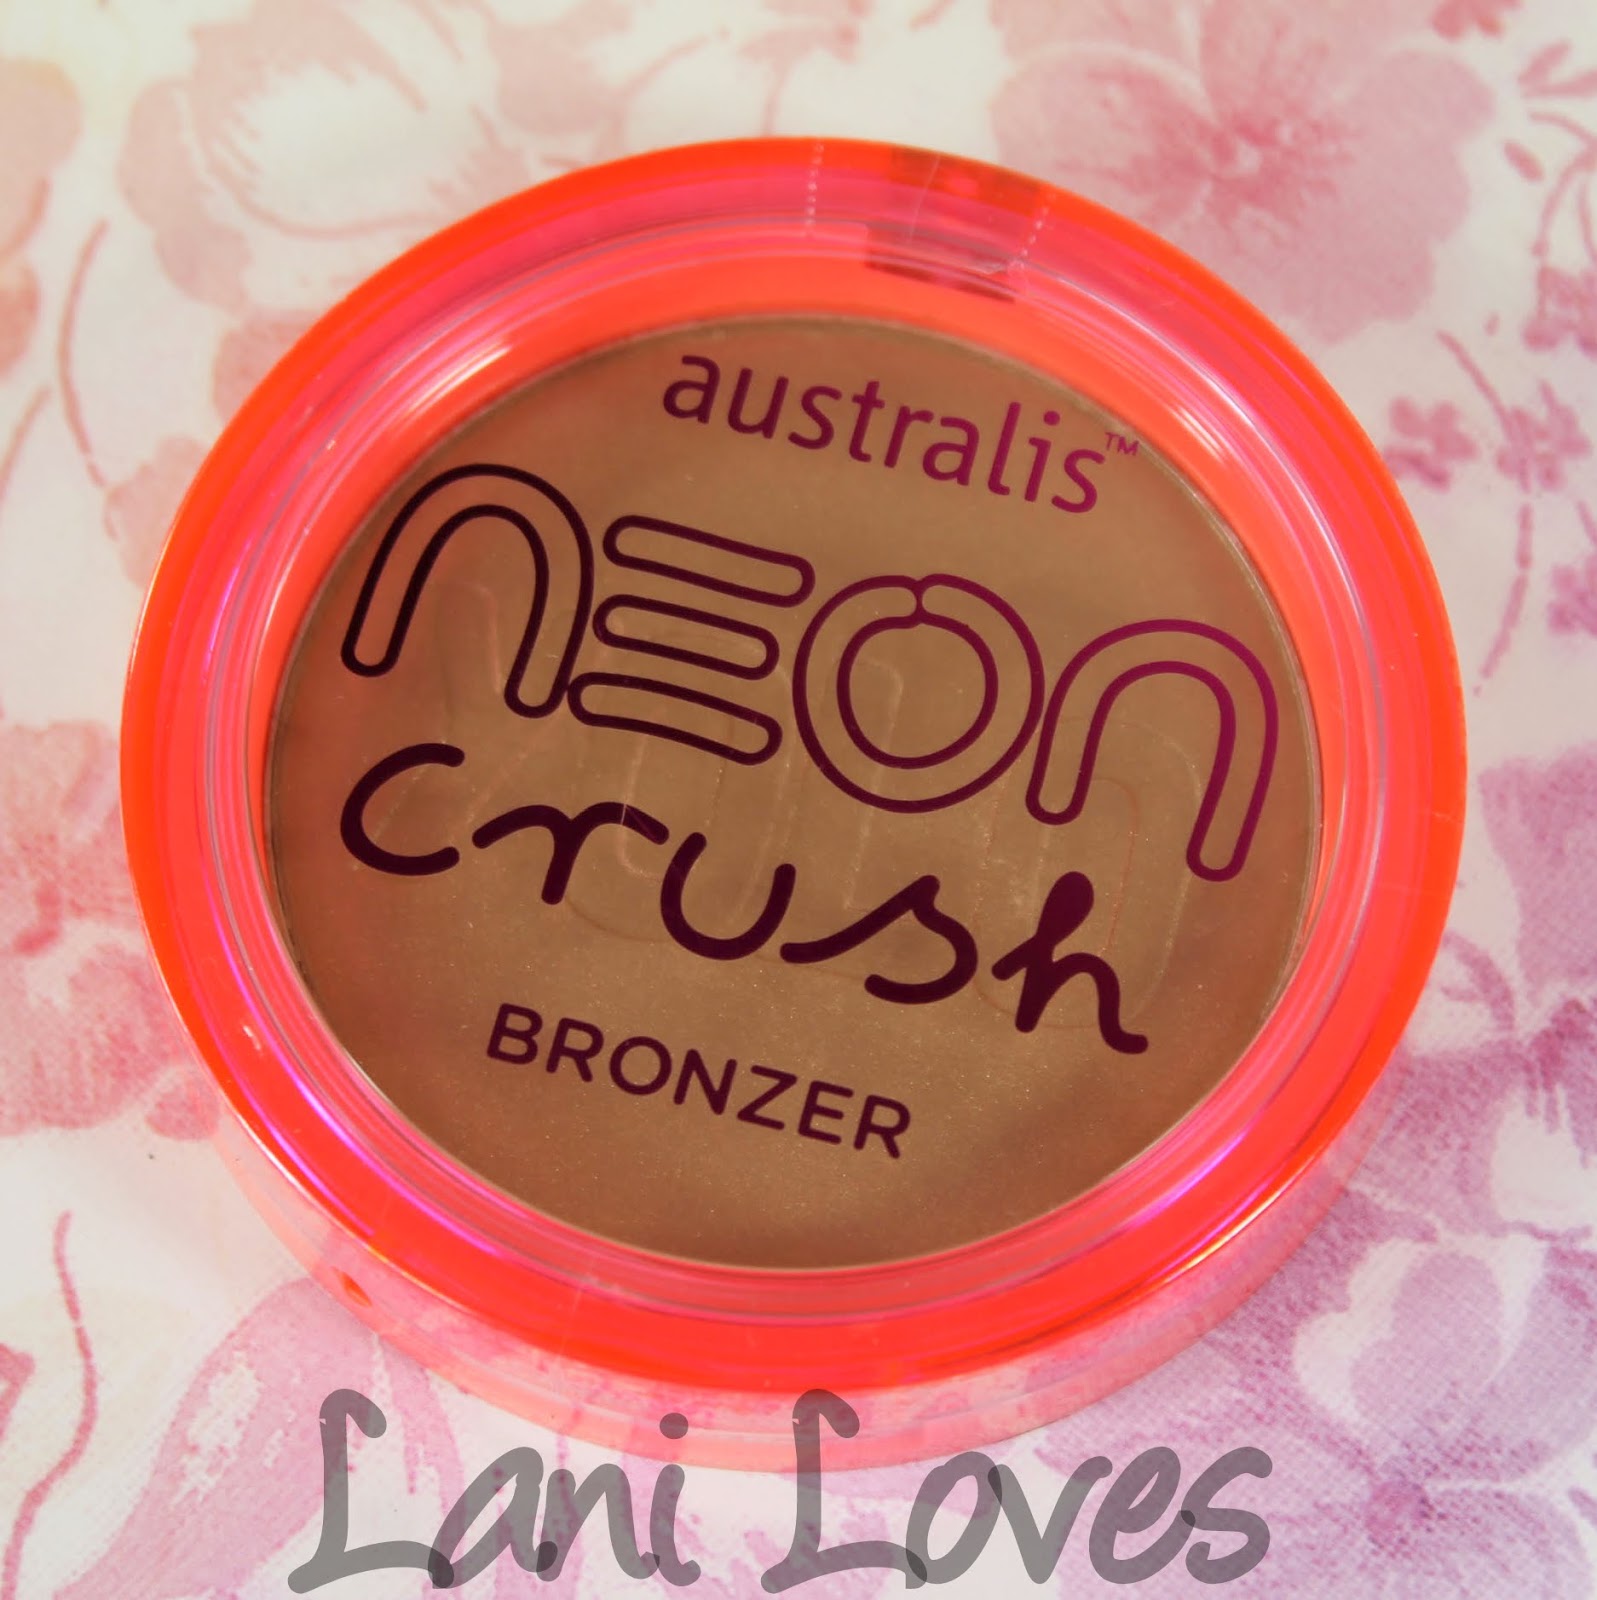 Australis Neon Crush: You Only Live Once Bronzer Swatches & Review